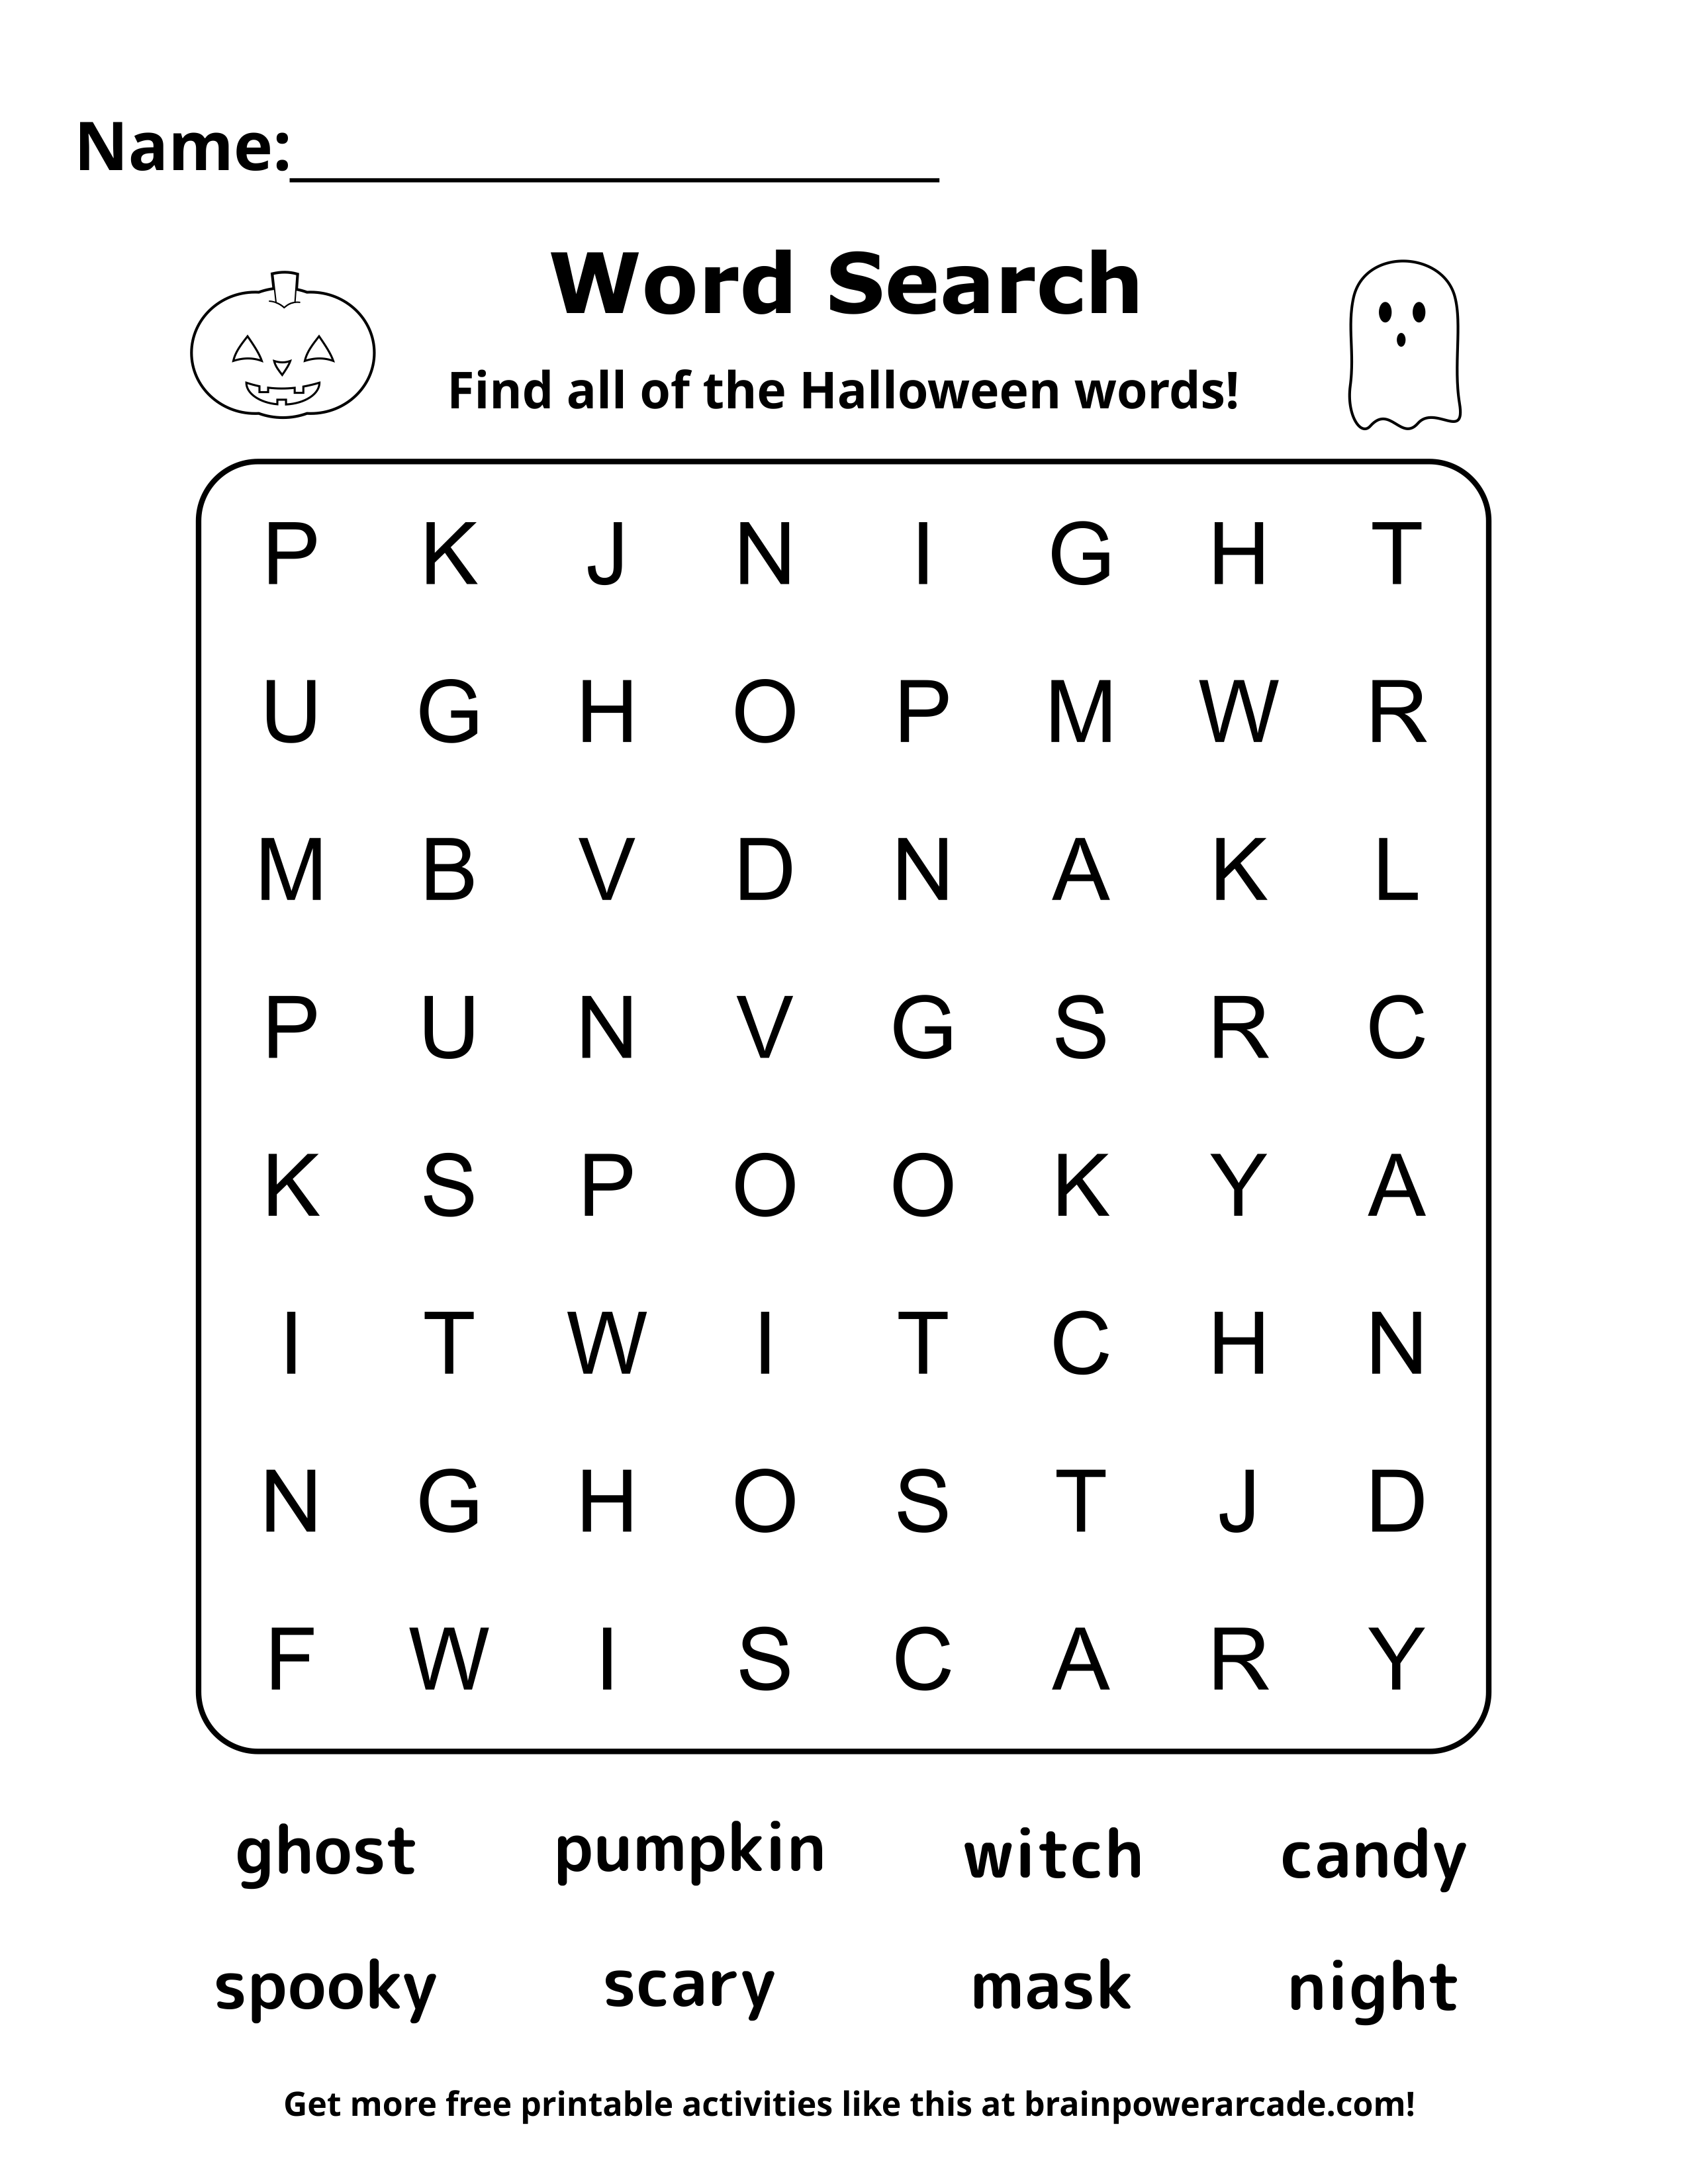 Find the Halloween Words